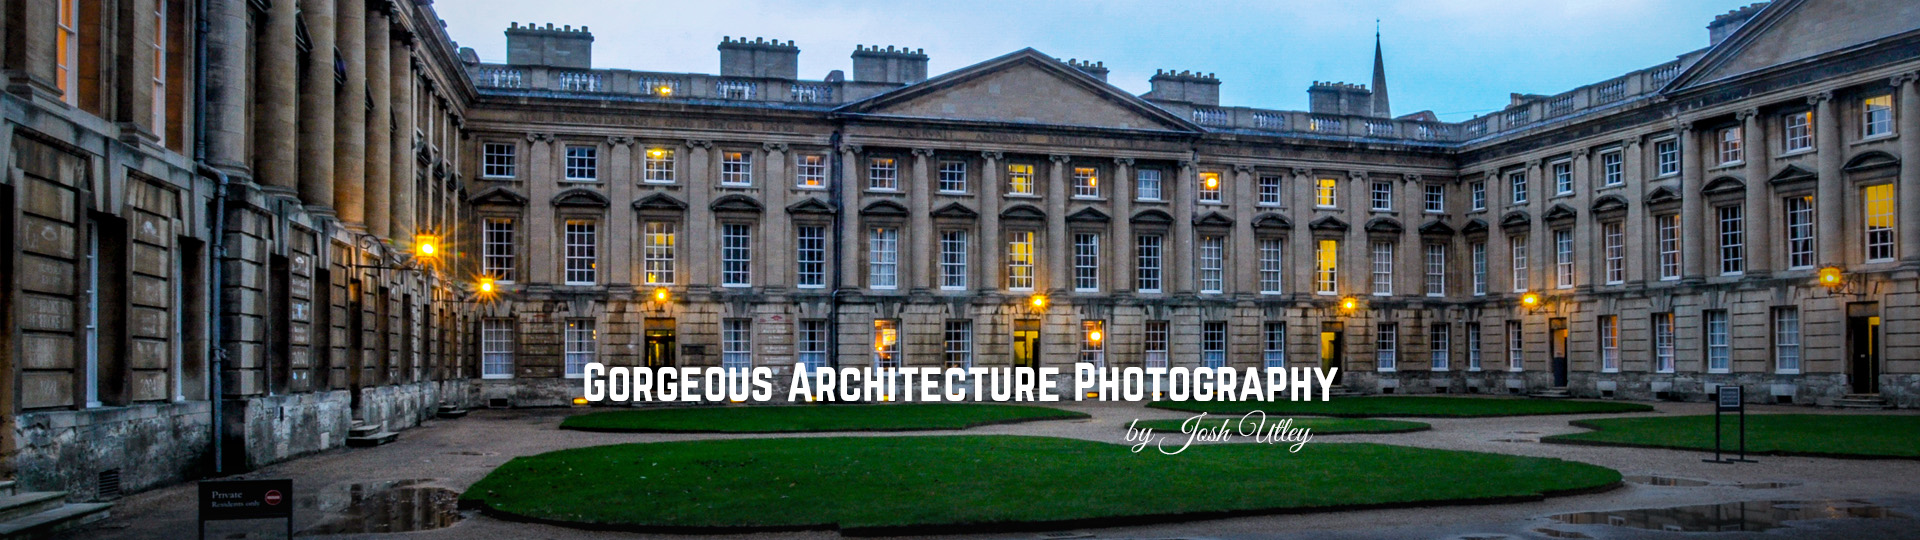 Gorgeous Architecture Photography by Josh Utley